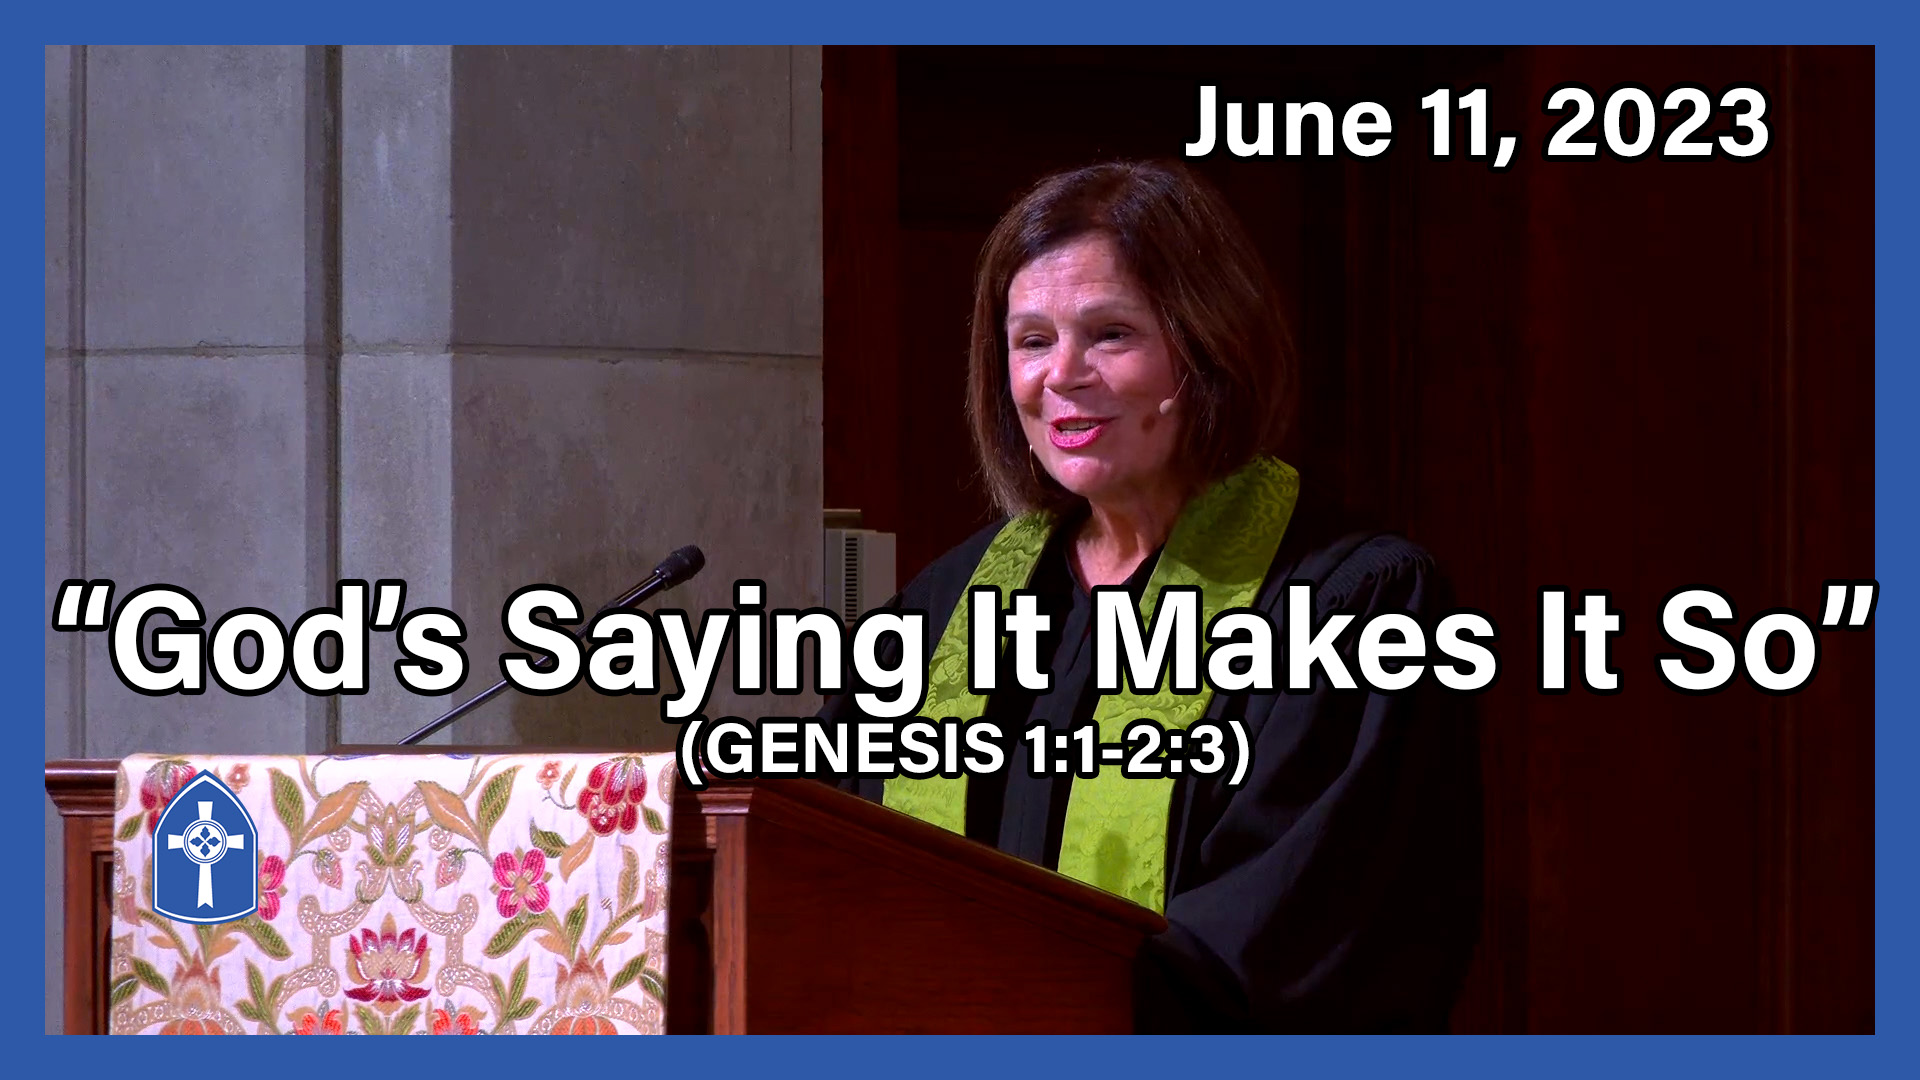 June 11 - God's Saying It Makes It So